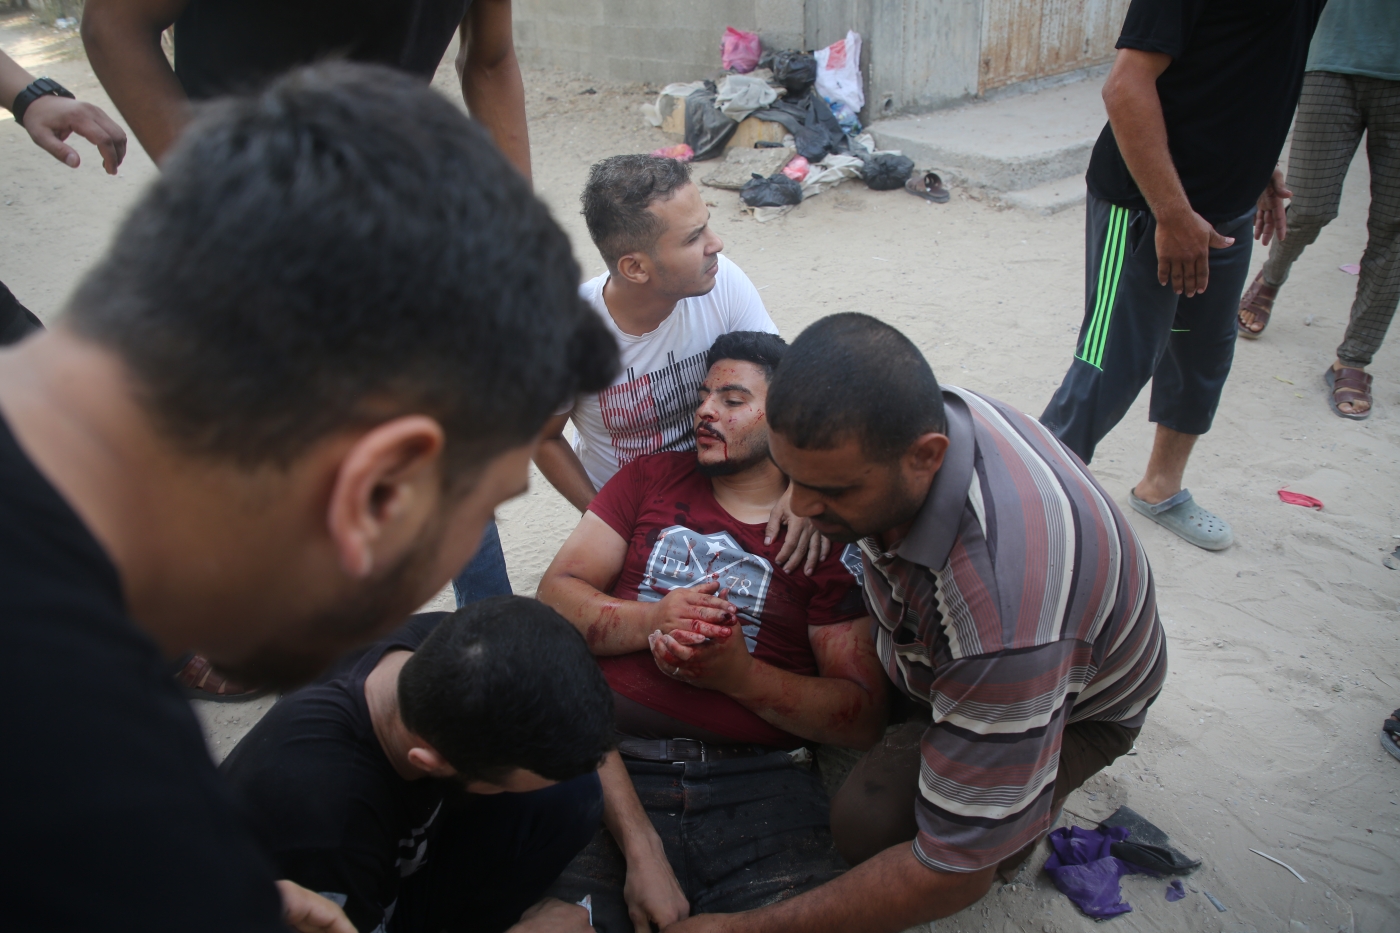 A wounded Palestinian man in Gaza City following an Israeli airstrike, on 5 August 2022 (MEE/Mohammed al-Hajjar)